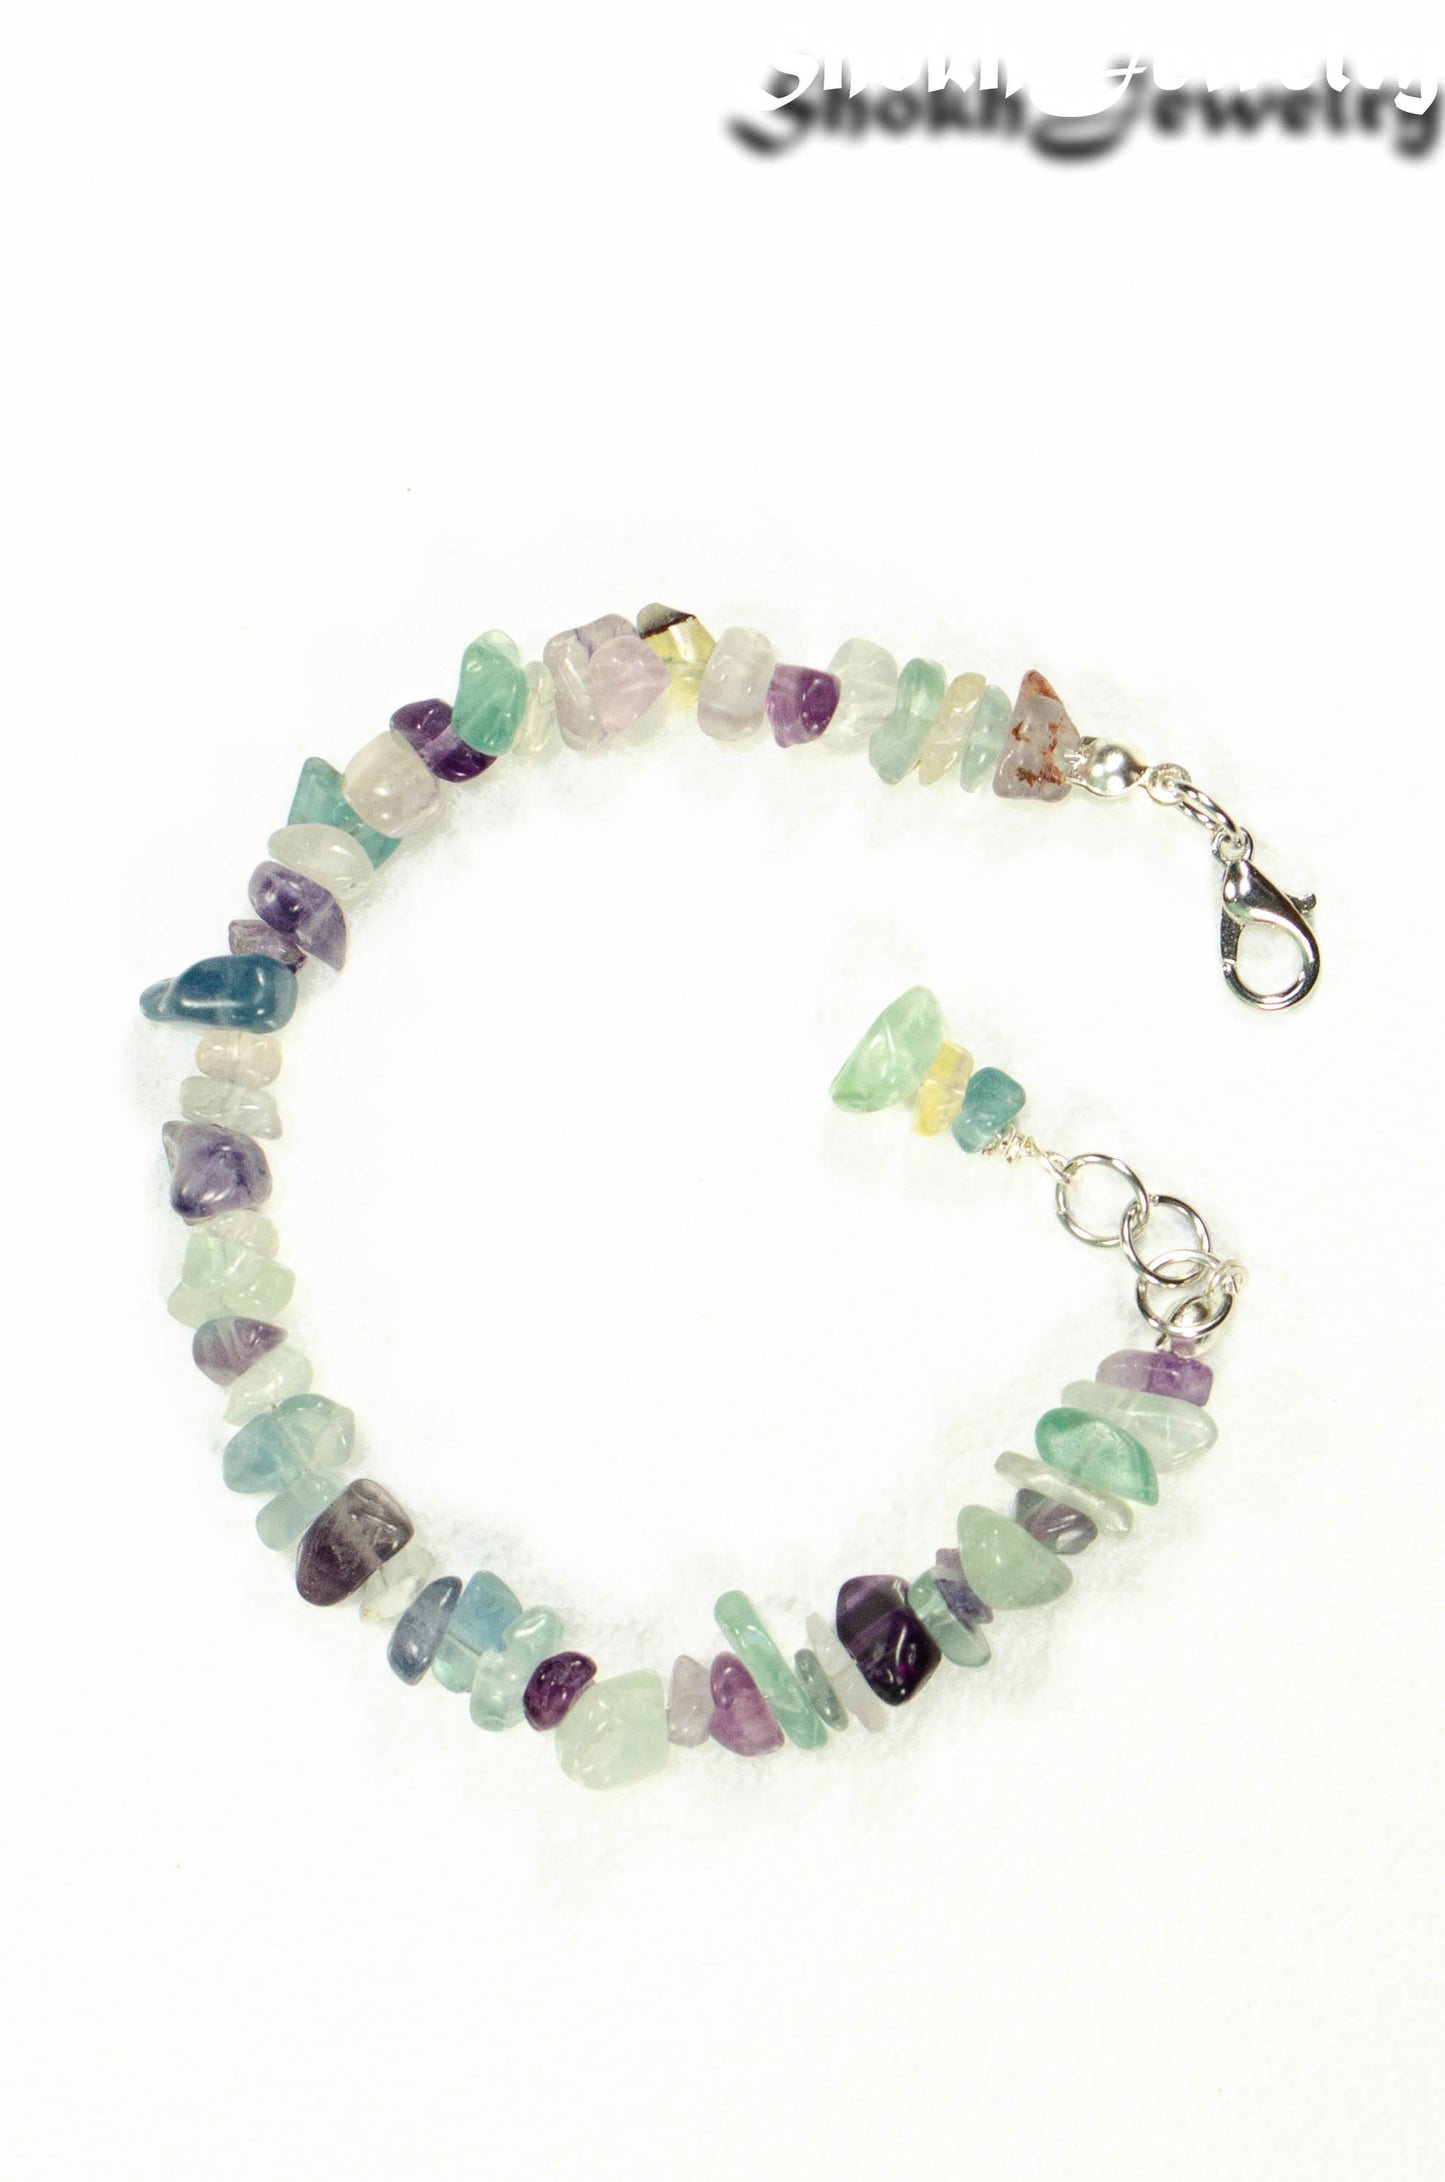 Top view of Natural Rainbow Fluorite Crystal Chip Bracelet.